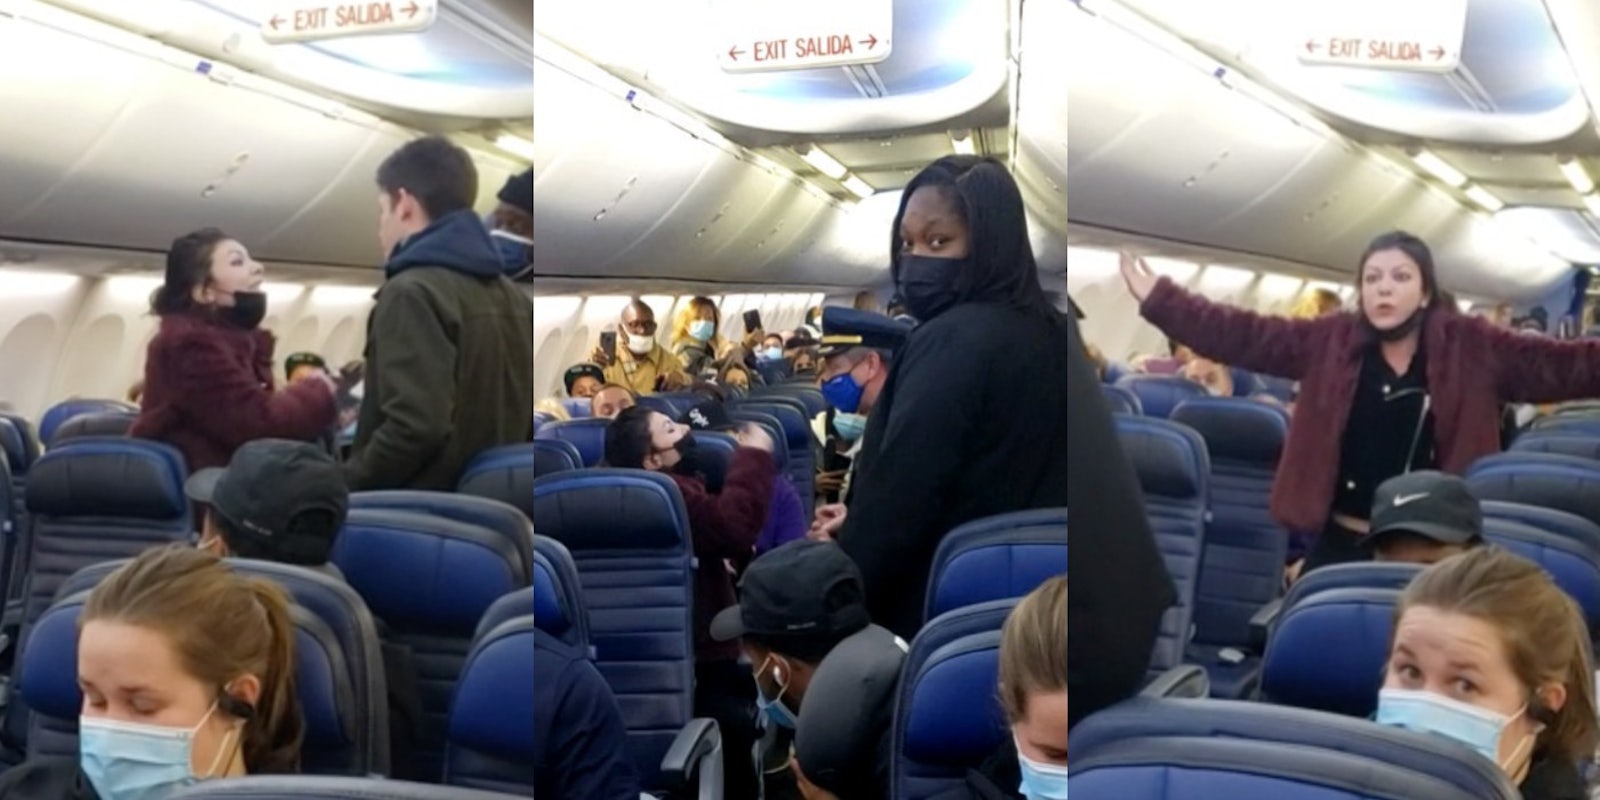 Racist anti-masker gets kicked off plane, says it's 'because I'm white.'